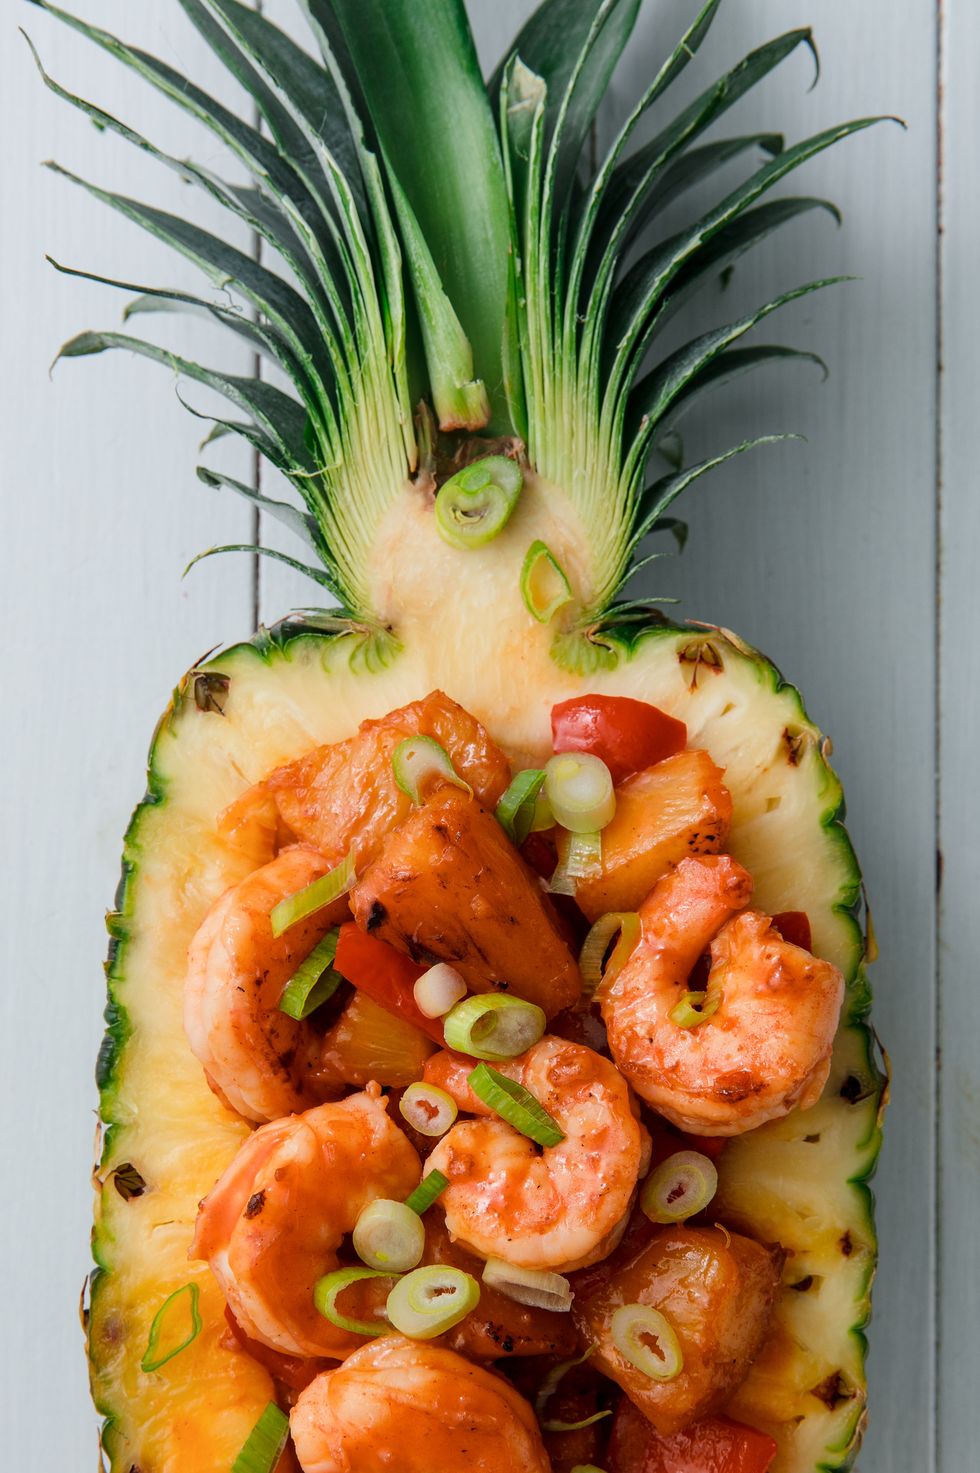 How To Make A Pineapple Bowl - Savor the Best